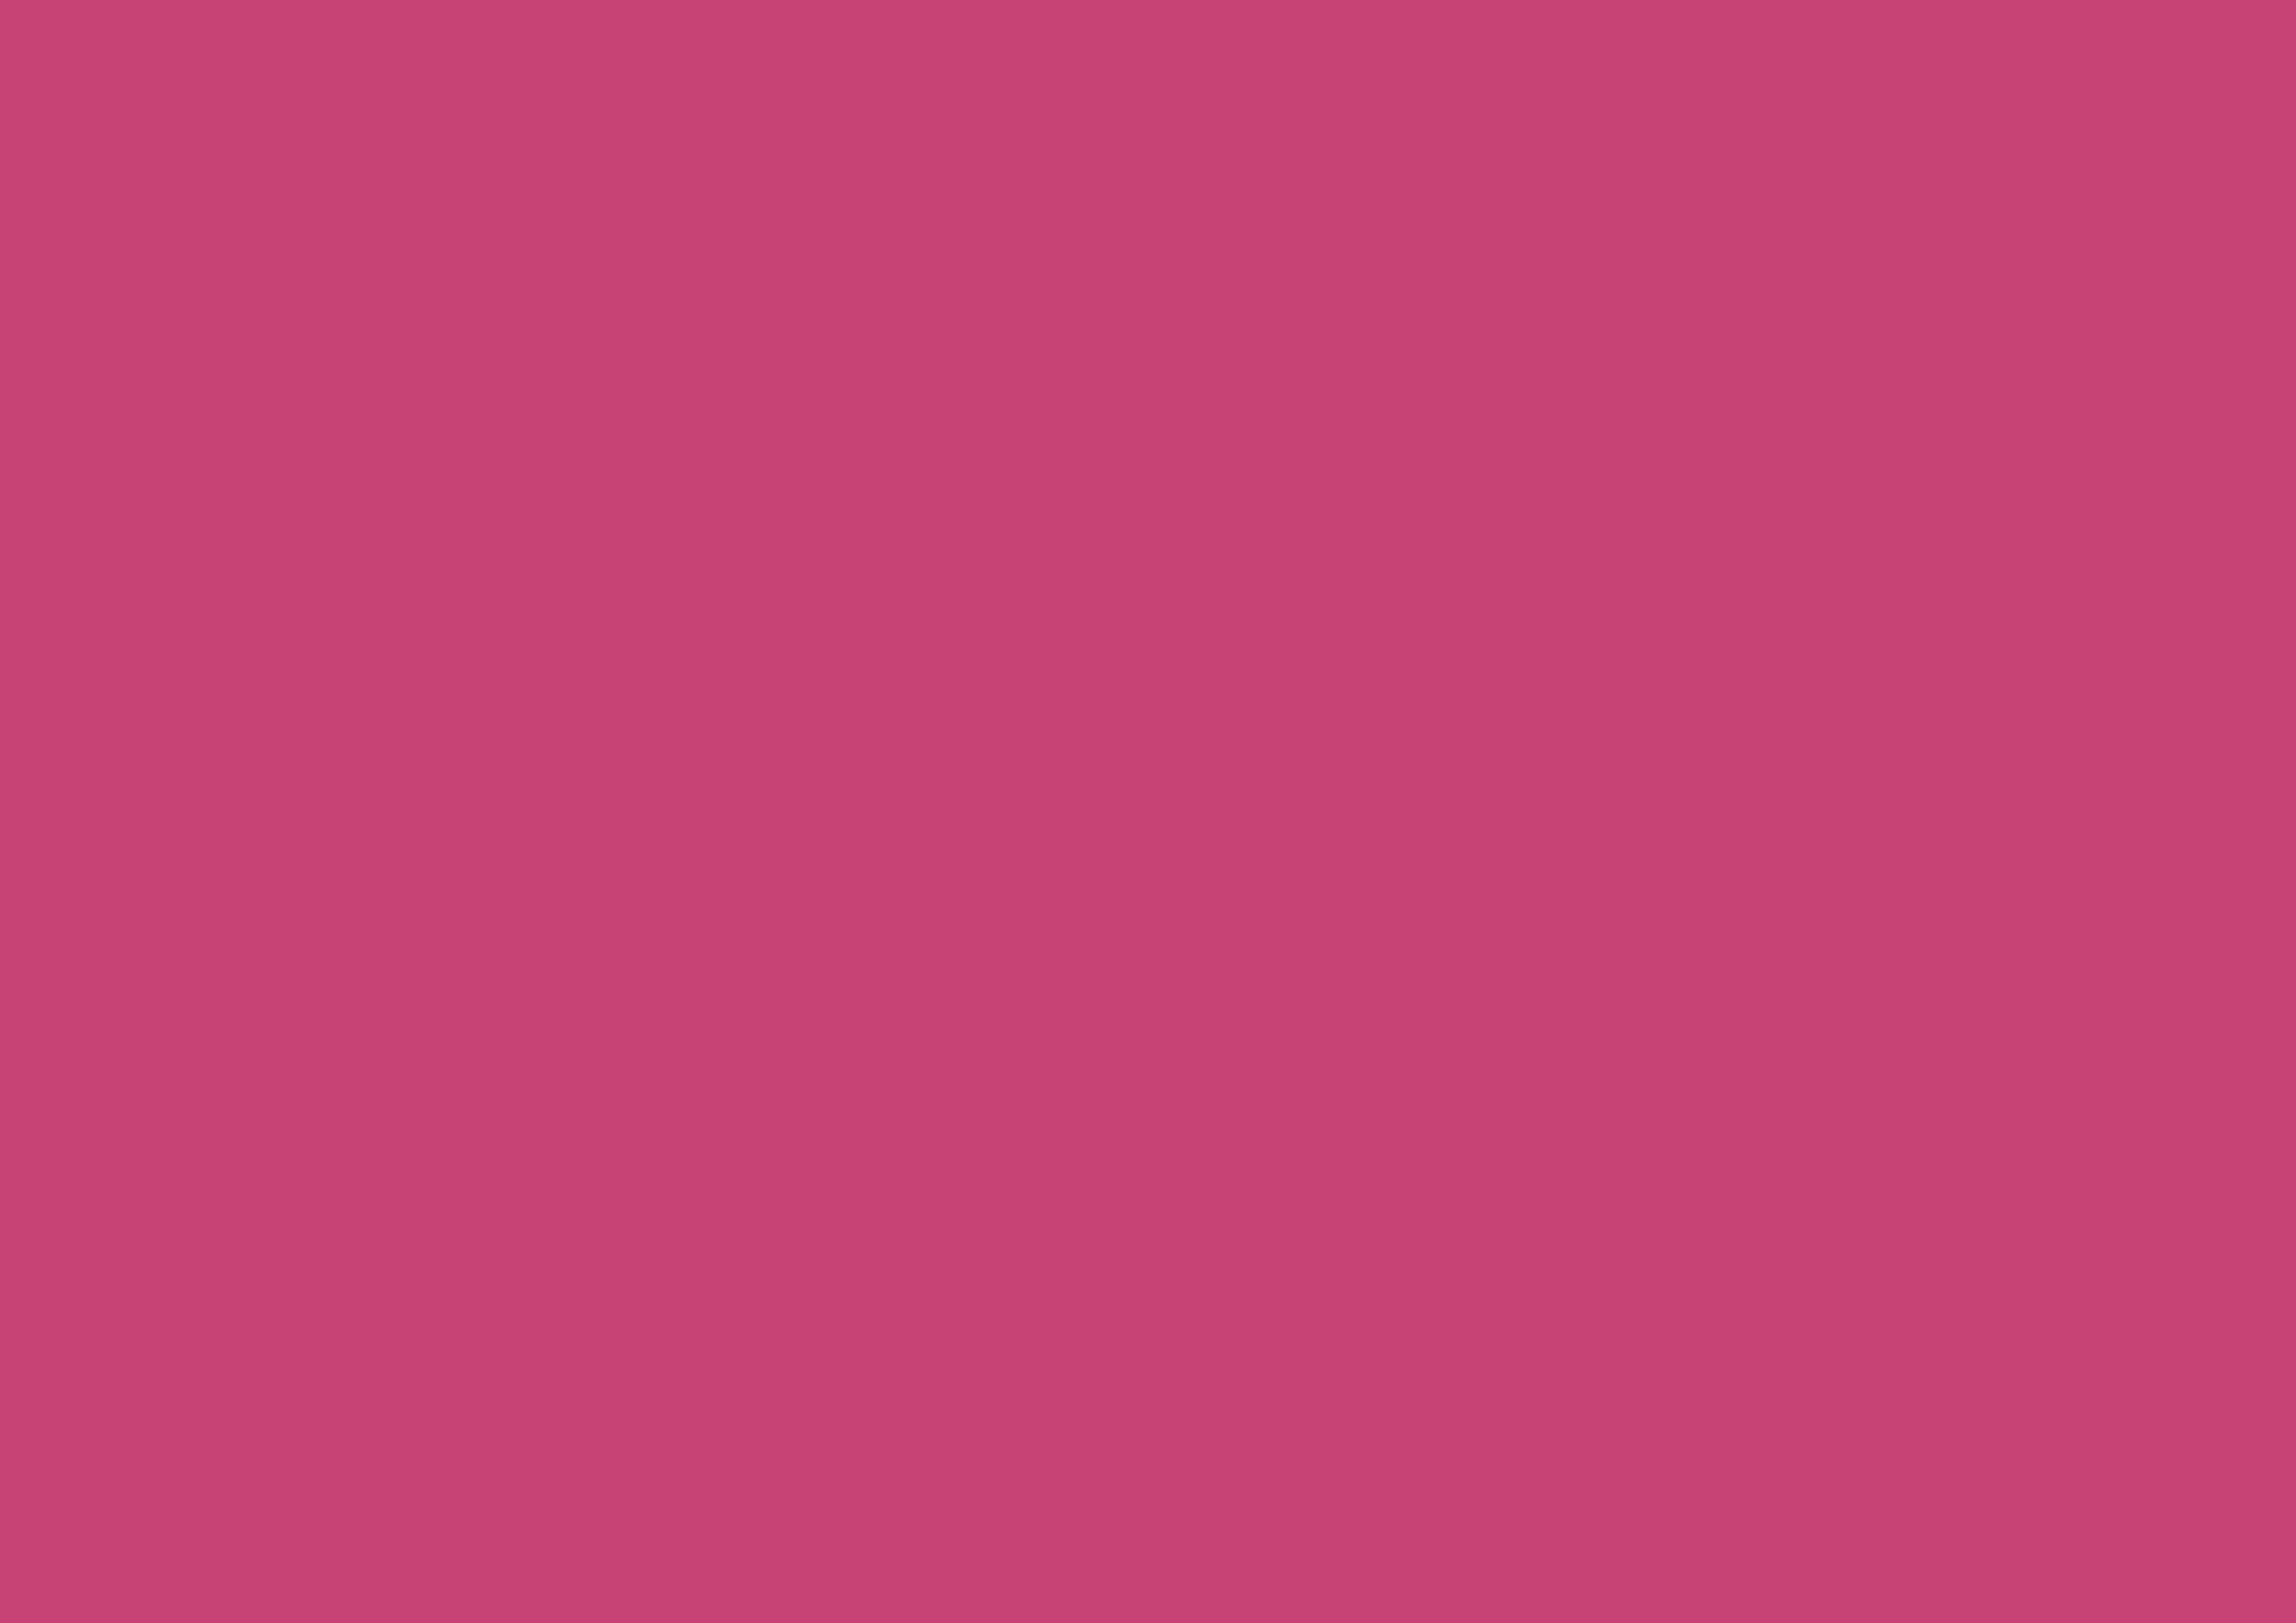 3508x2480 Fuchsia Rose Solid Color Background